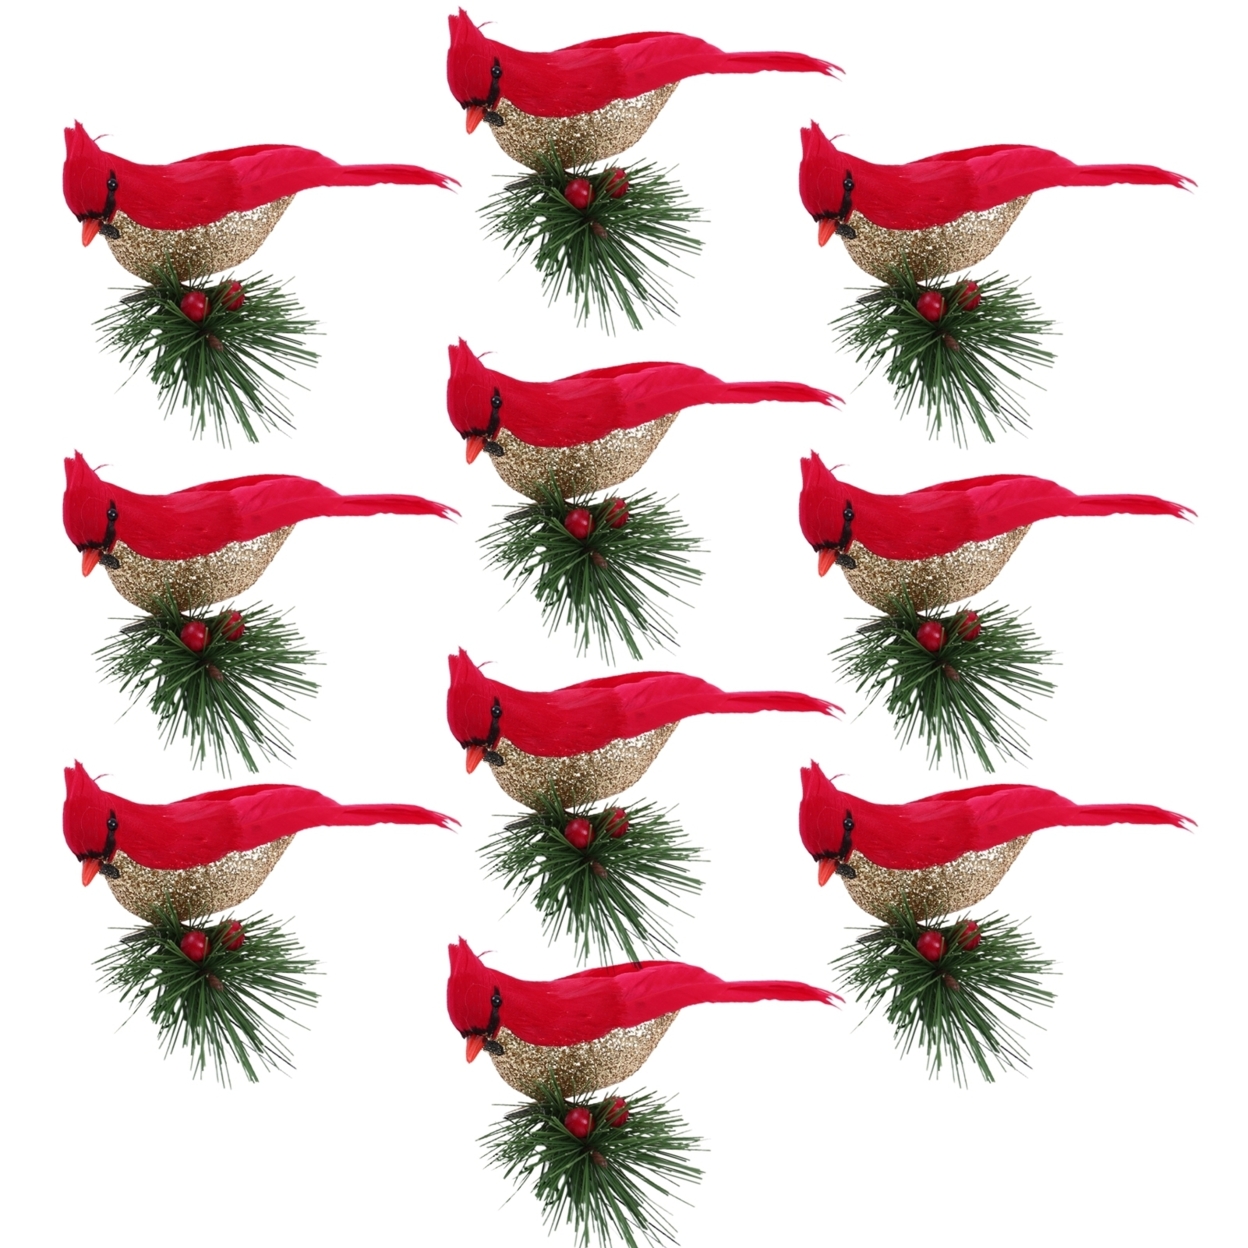 10Pcs/Box Artificial Birds Realistic Red Feather Birds Pine Cones Xmas Tree Decors with Metal Clips DIY Crafts for Garden - golden